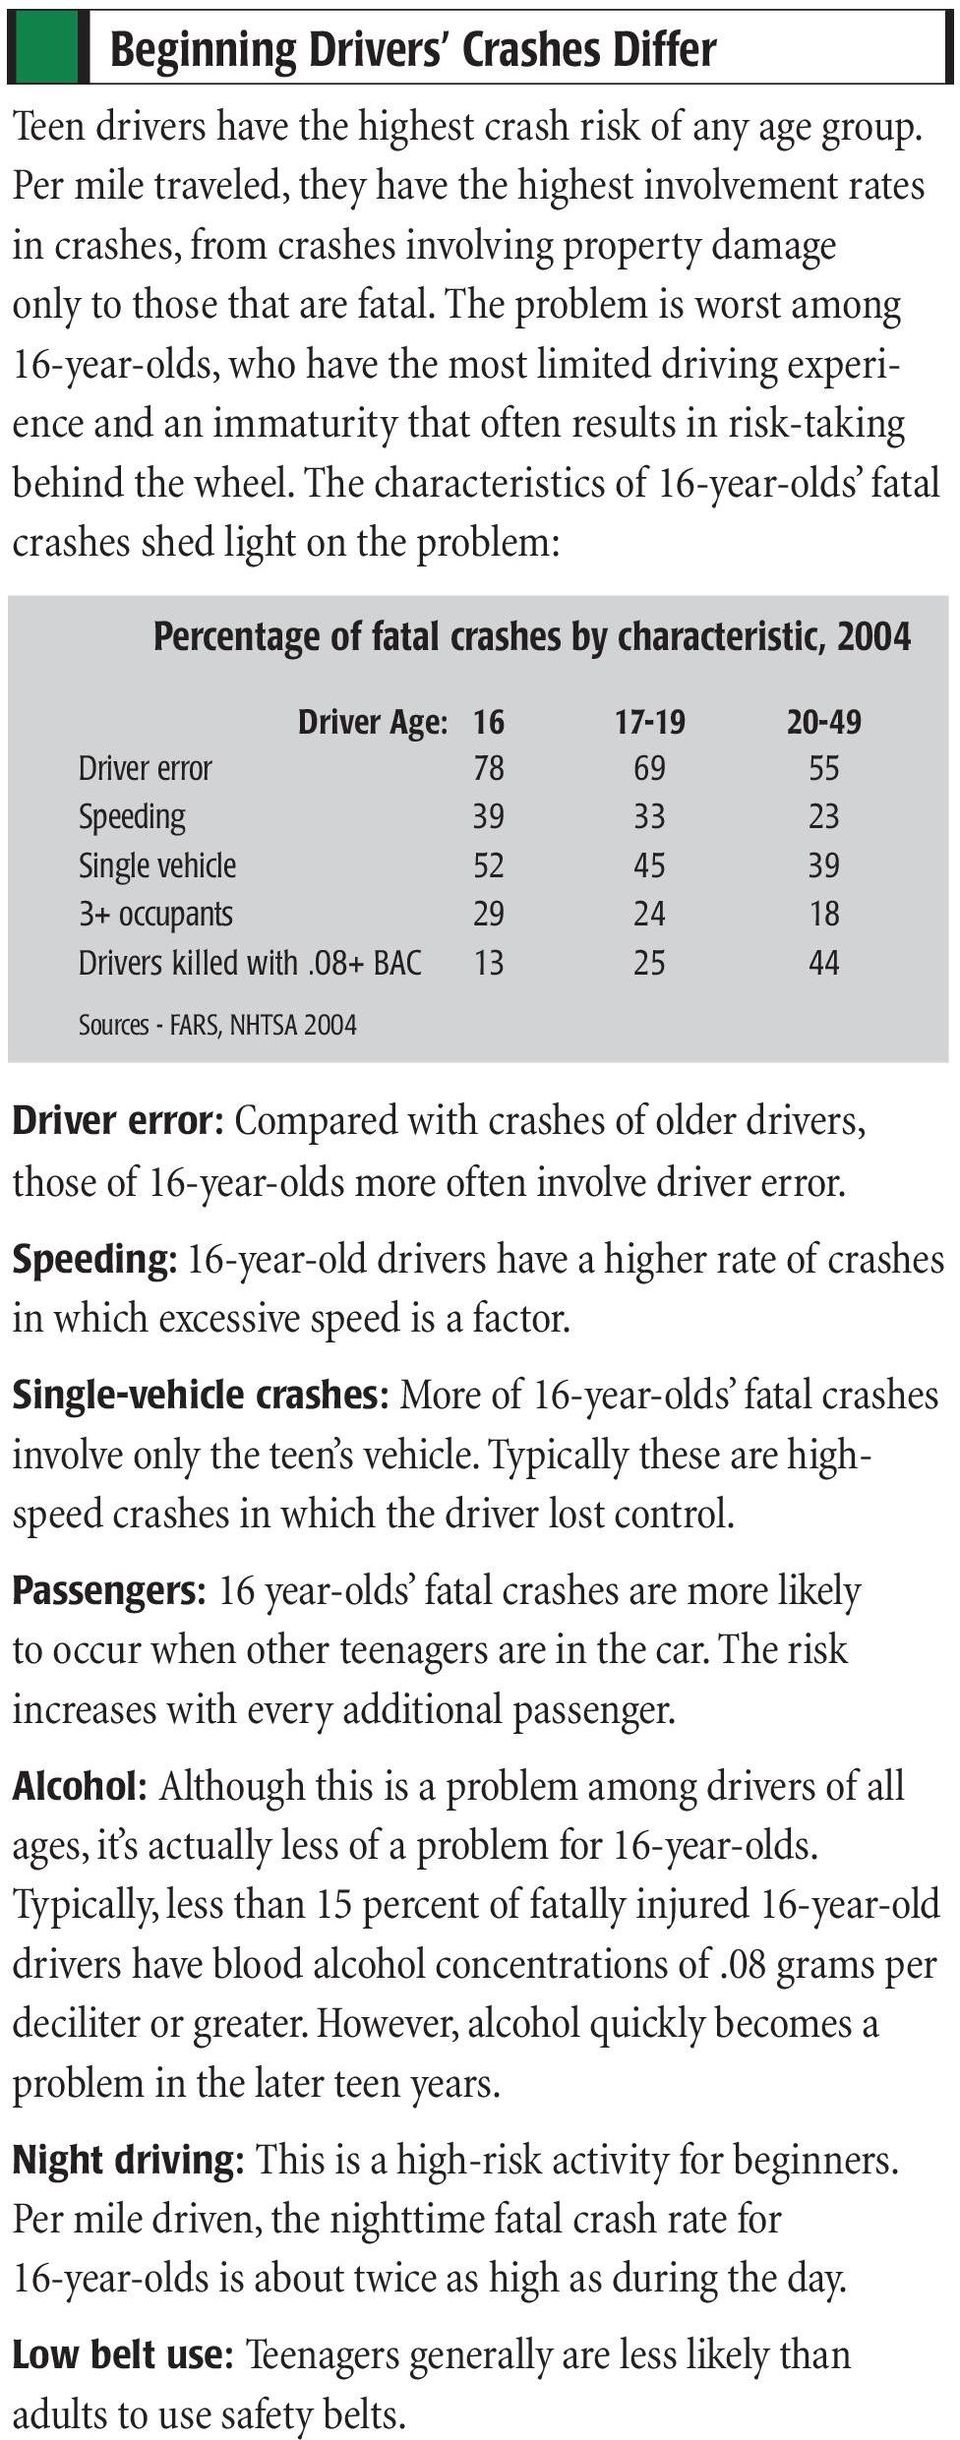 The problem is worst among 16-year-olds, who have the most limited driving experience and an immaturity that often results in risk-taking behind the wheel.